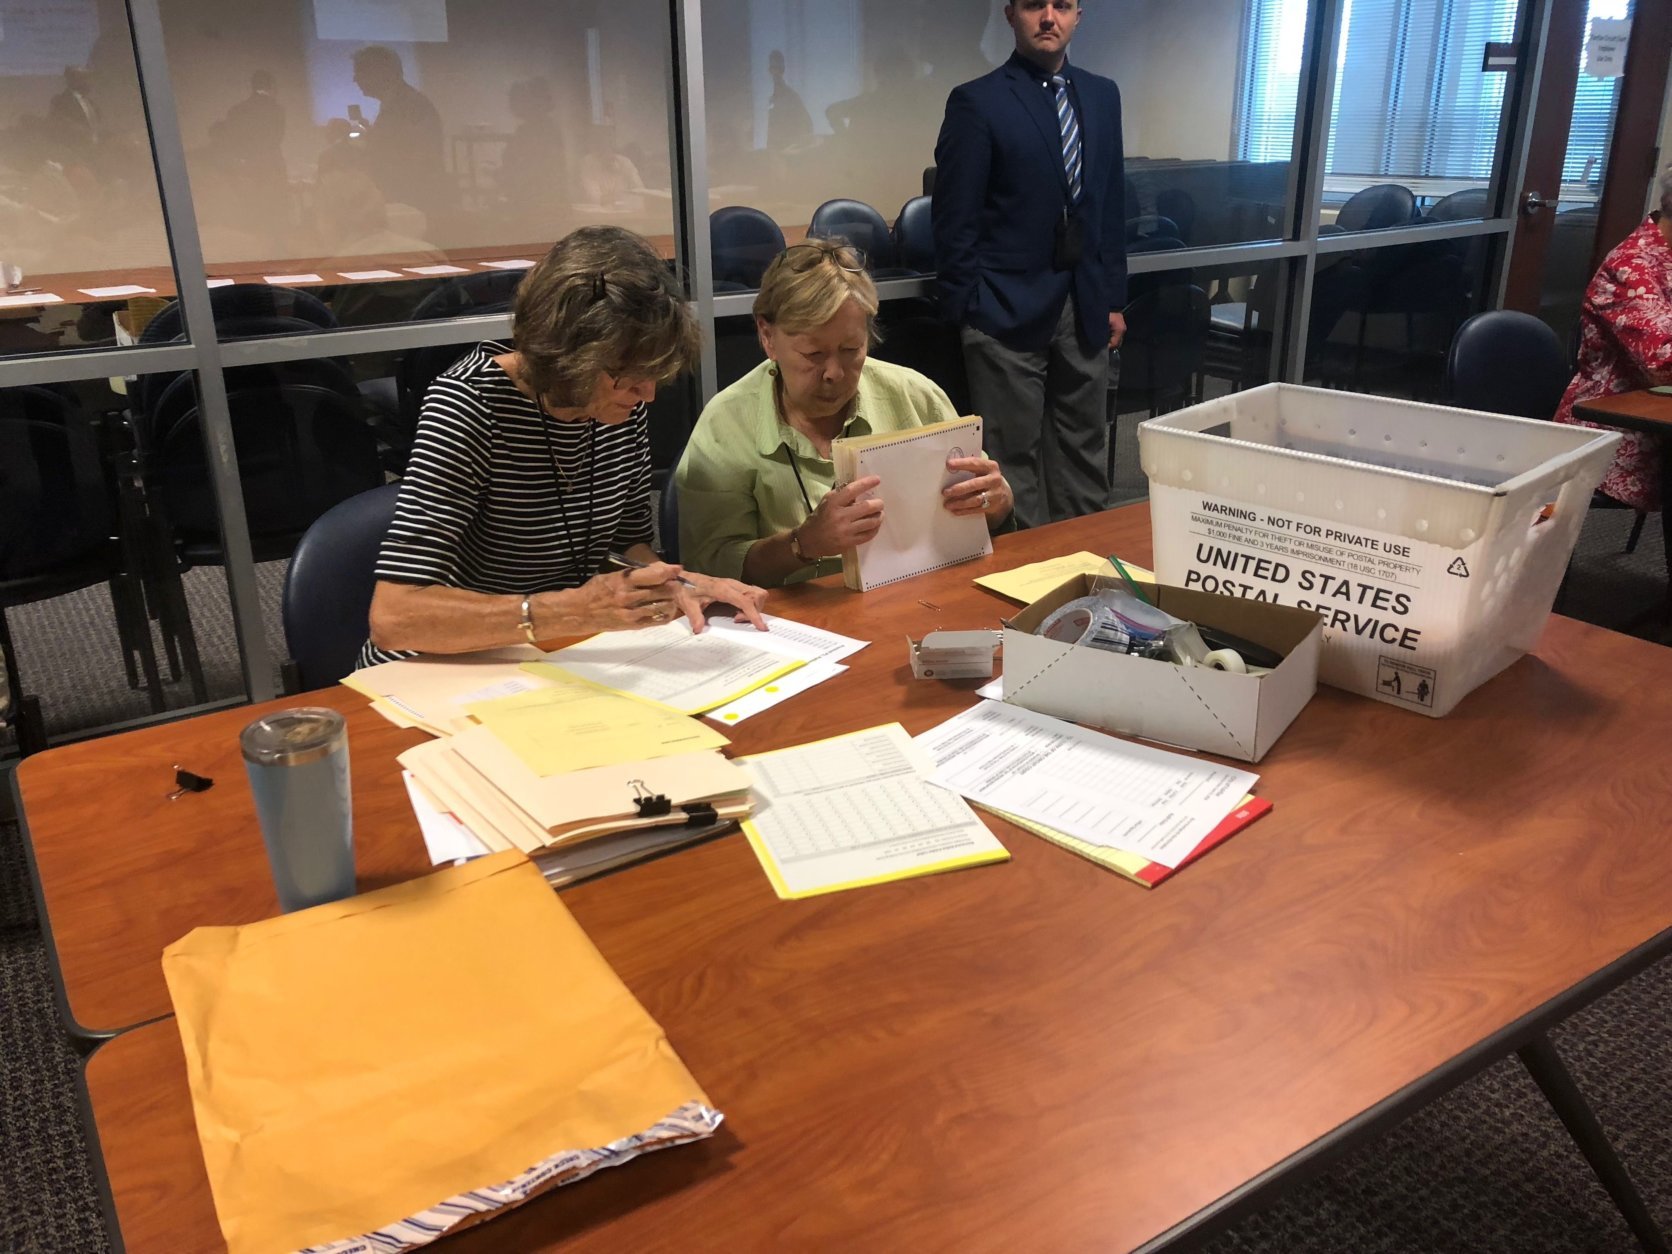 In a first for Virginia, elections officials gathered Thursday and Friday at the Fairfax County Courthouse to prove that election results from June’s primary were correct. (WTOP/Max Smith)